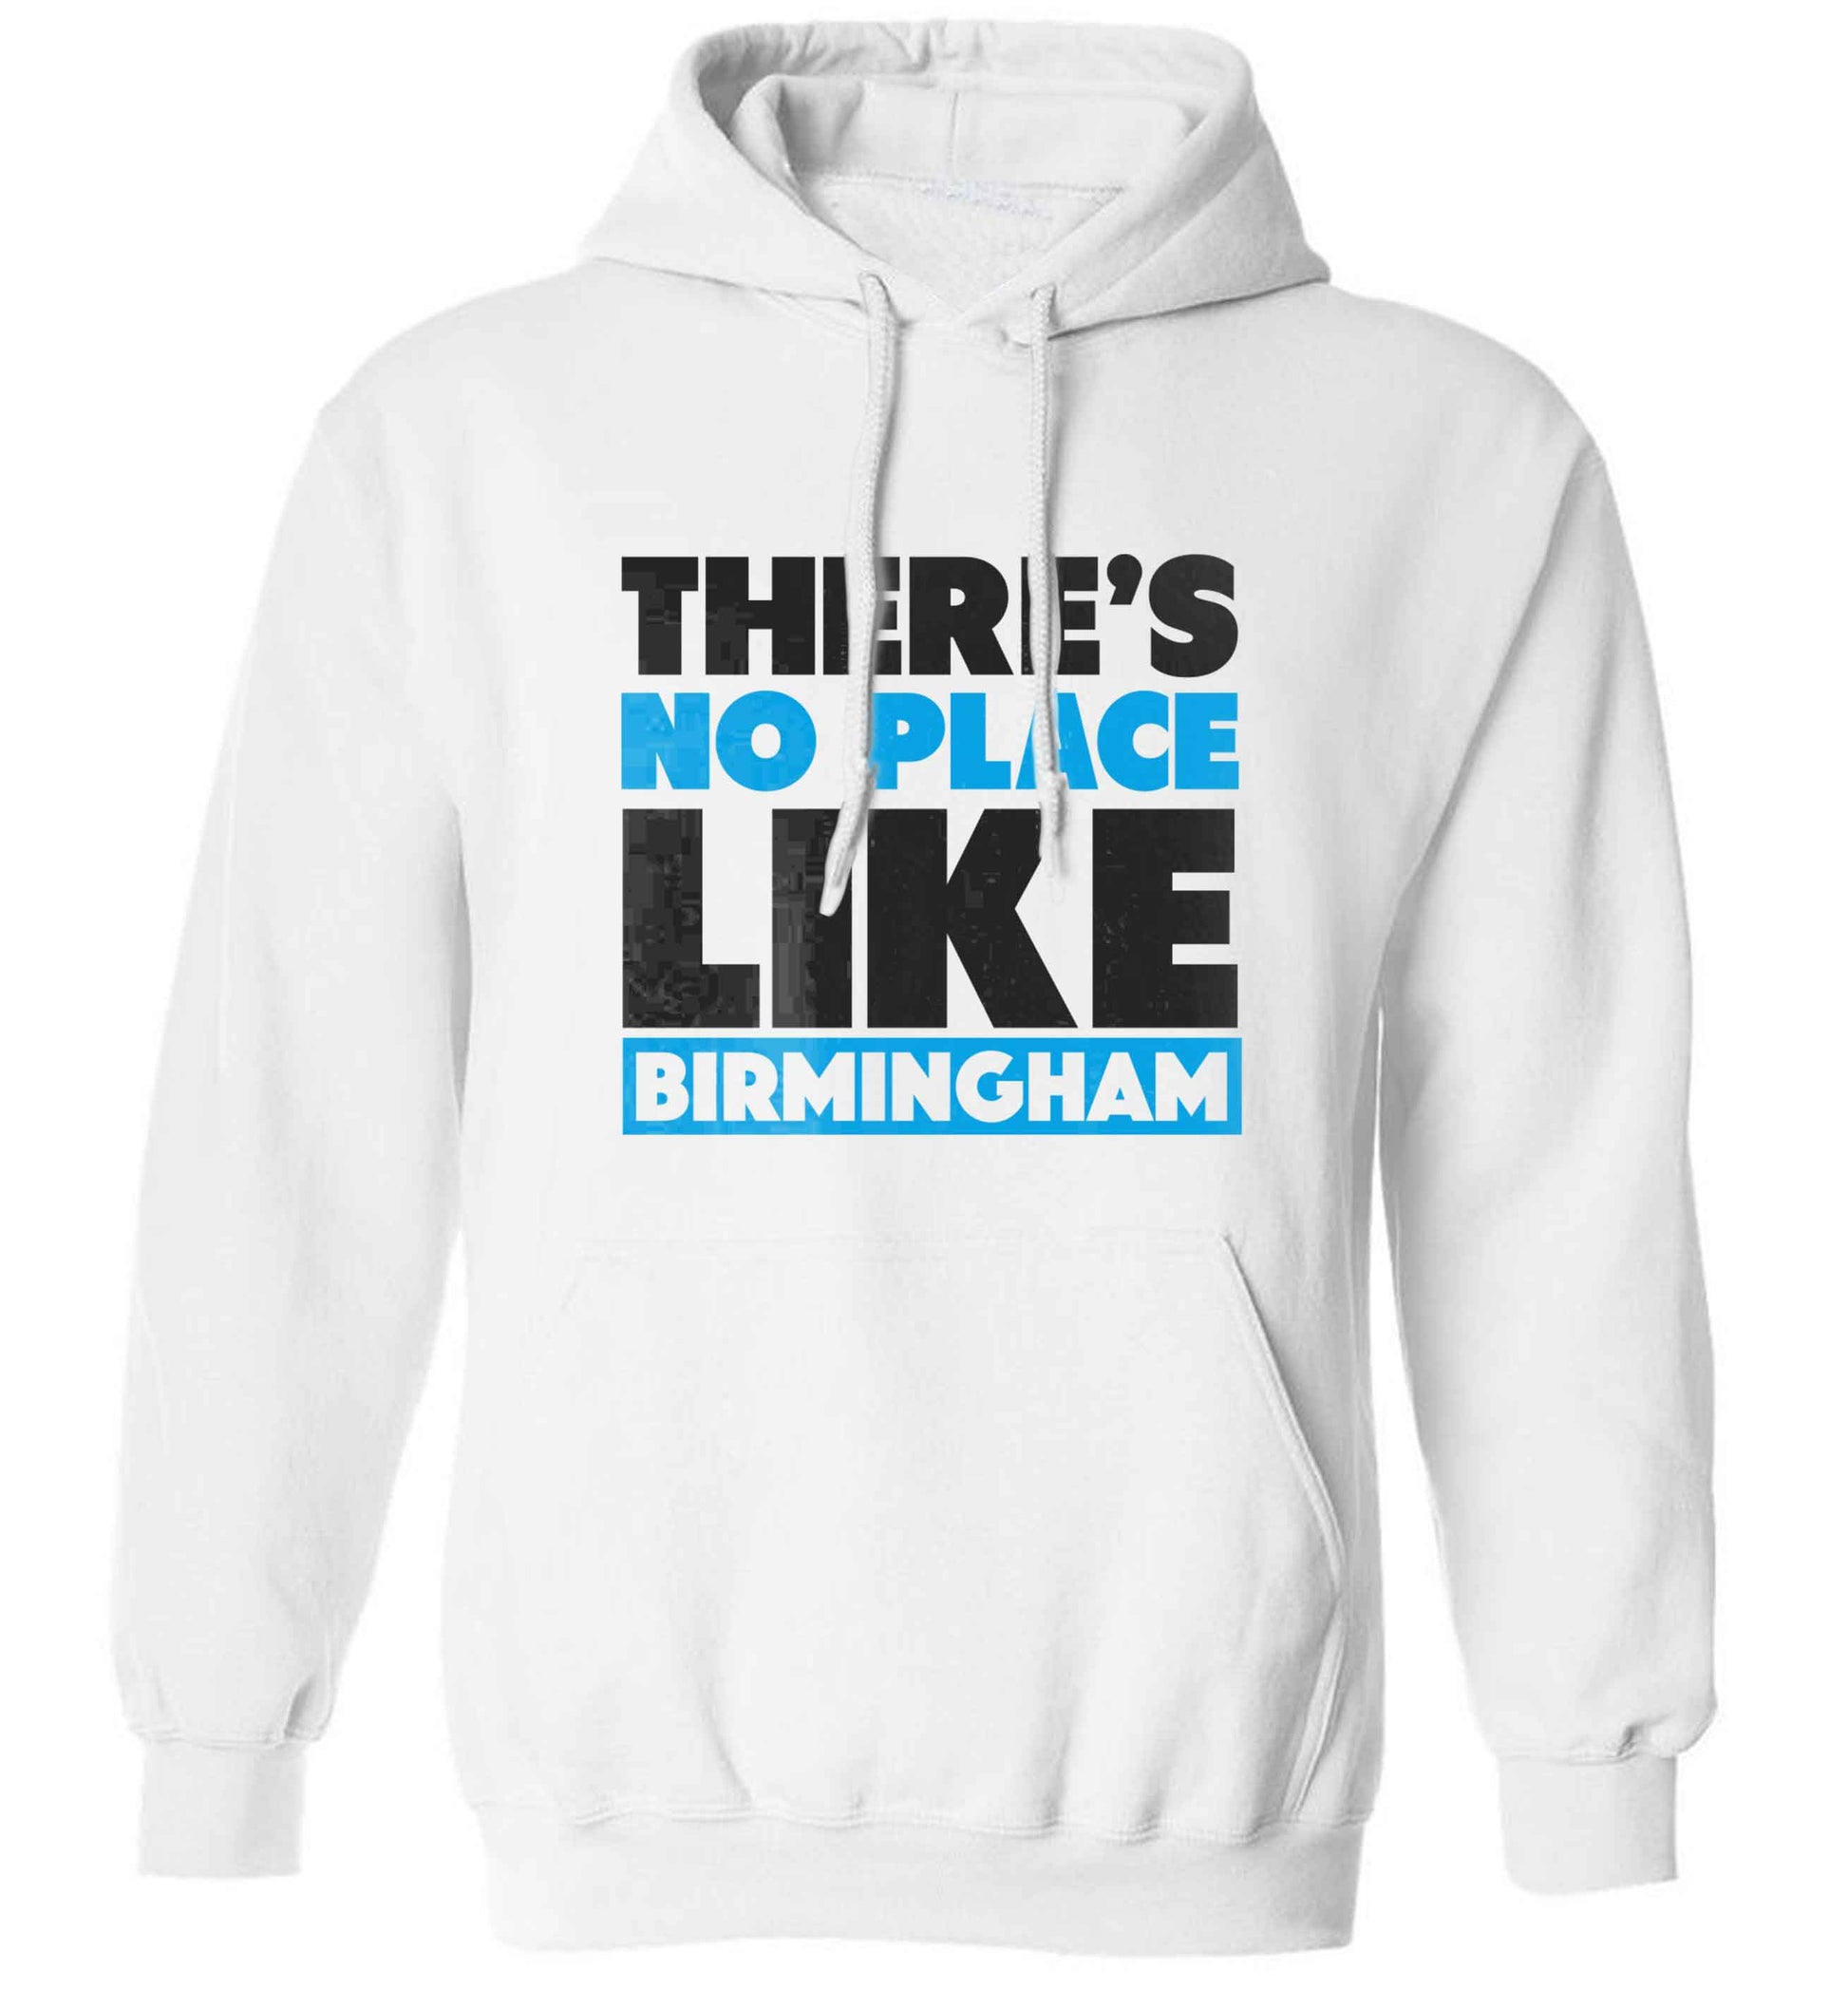 There's no place like Birmingham adults unisex white hoodie 2XL